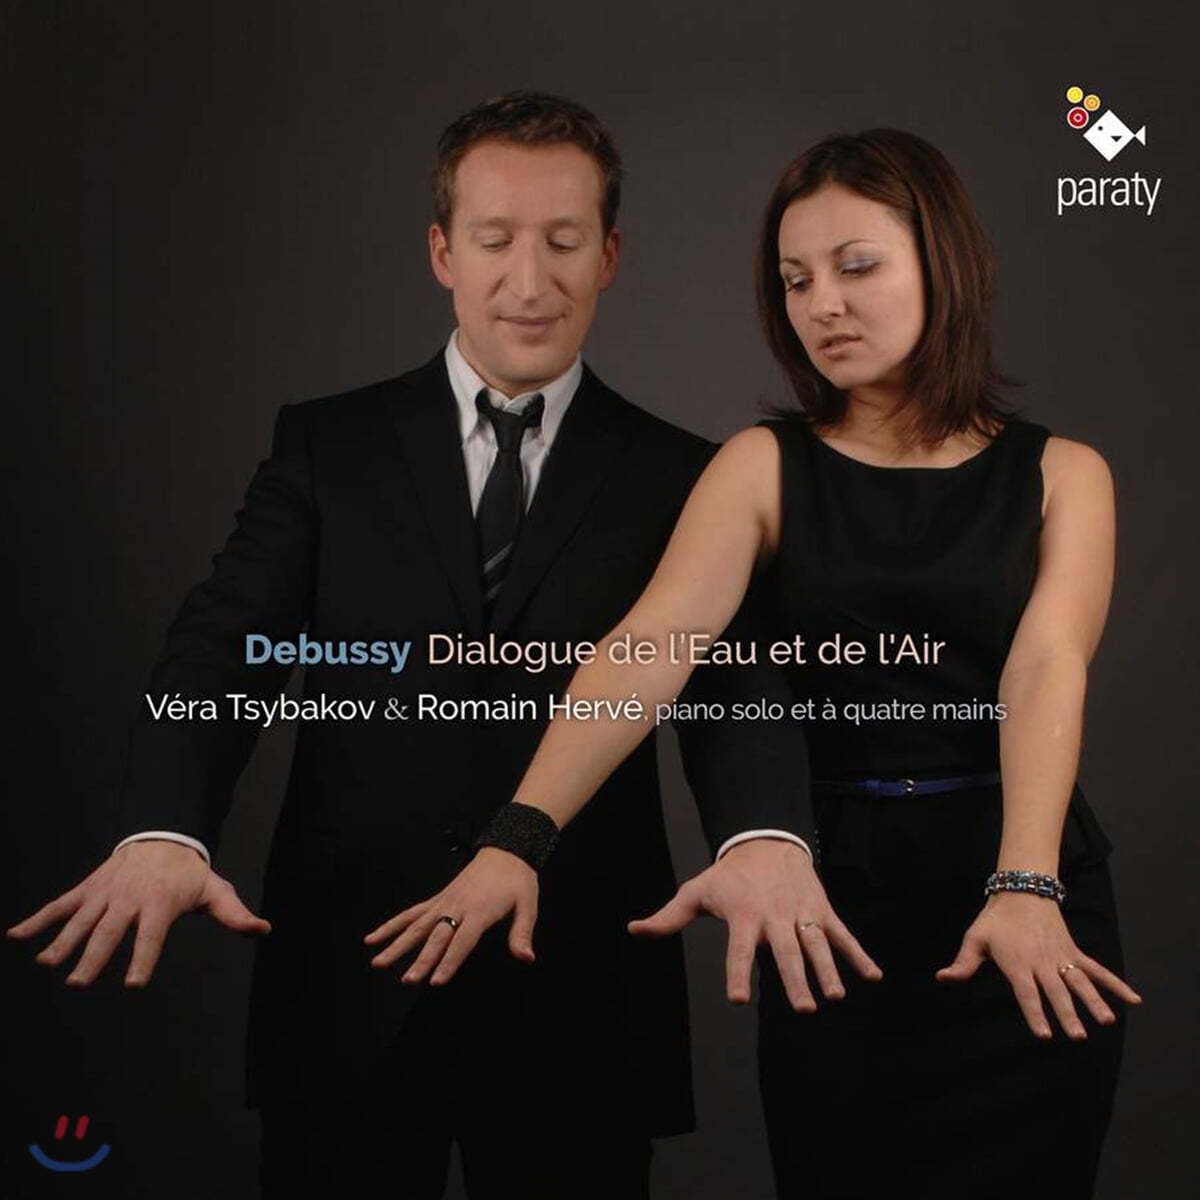 Vera Tsybakov / Romain Herve 드뷔시: 피아노 솔로와 네 손을 위한 작품 (Debussy: Works for Piano Solo, Works for Four Hands) 